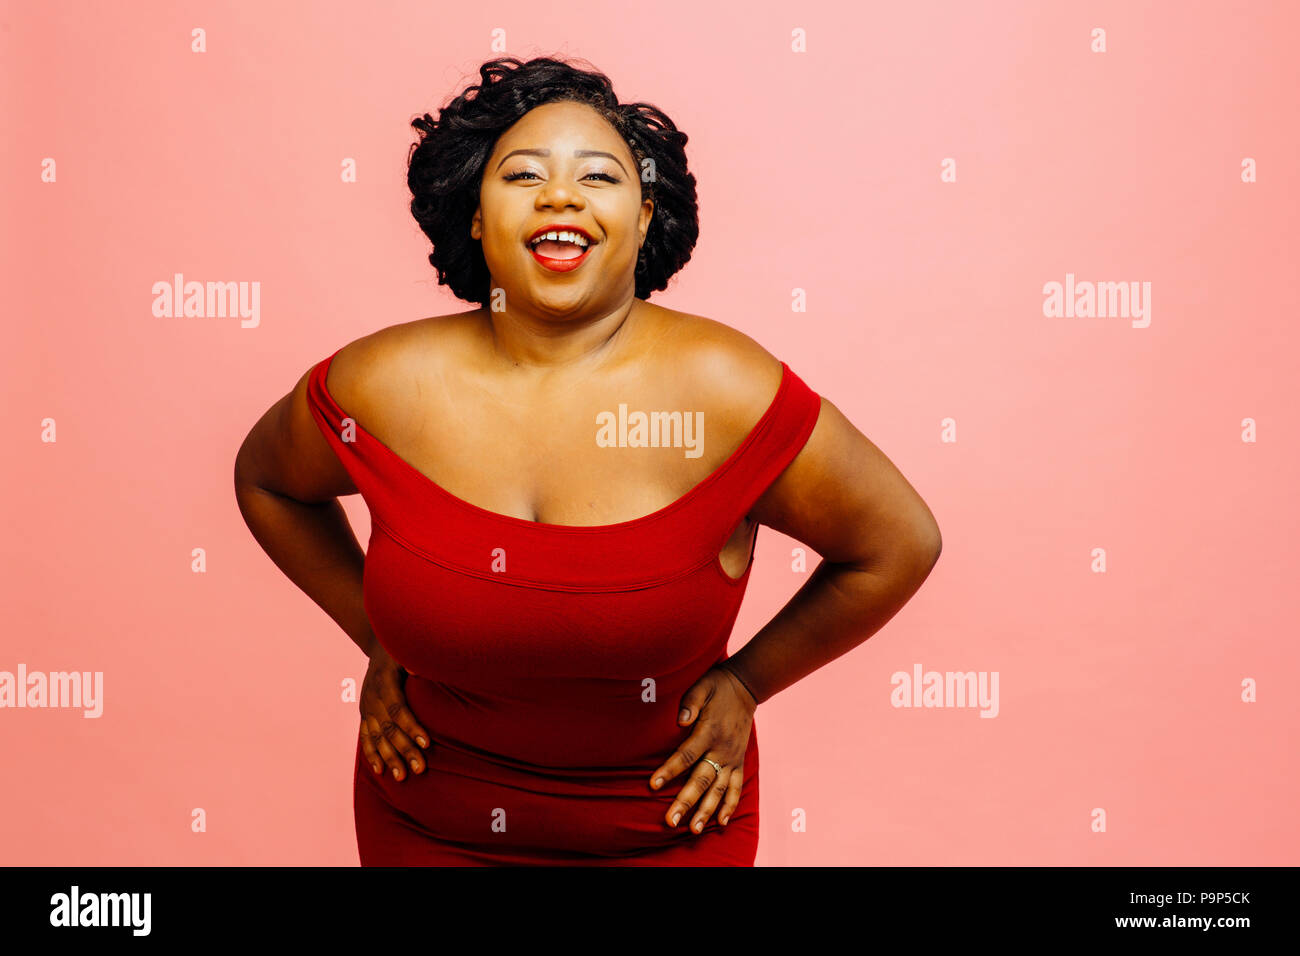 Happy confident satisfied curvy woman smiling Stock Photo